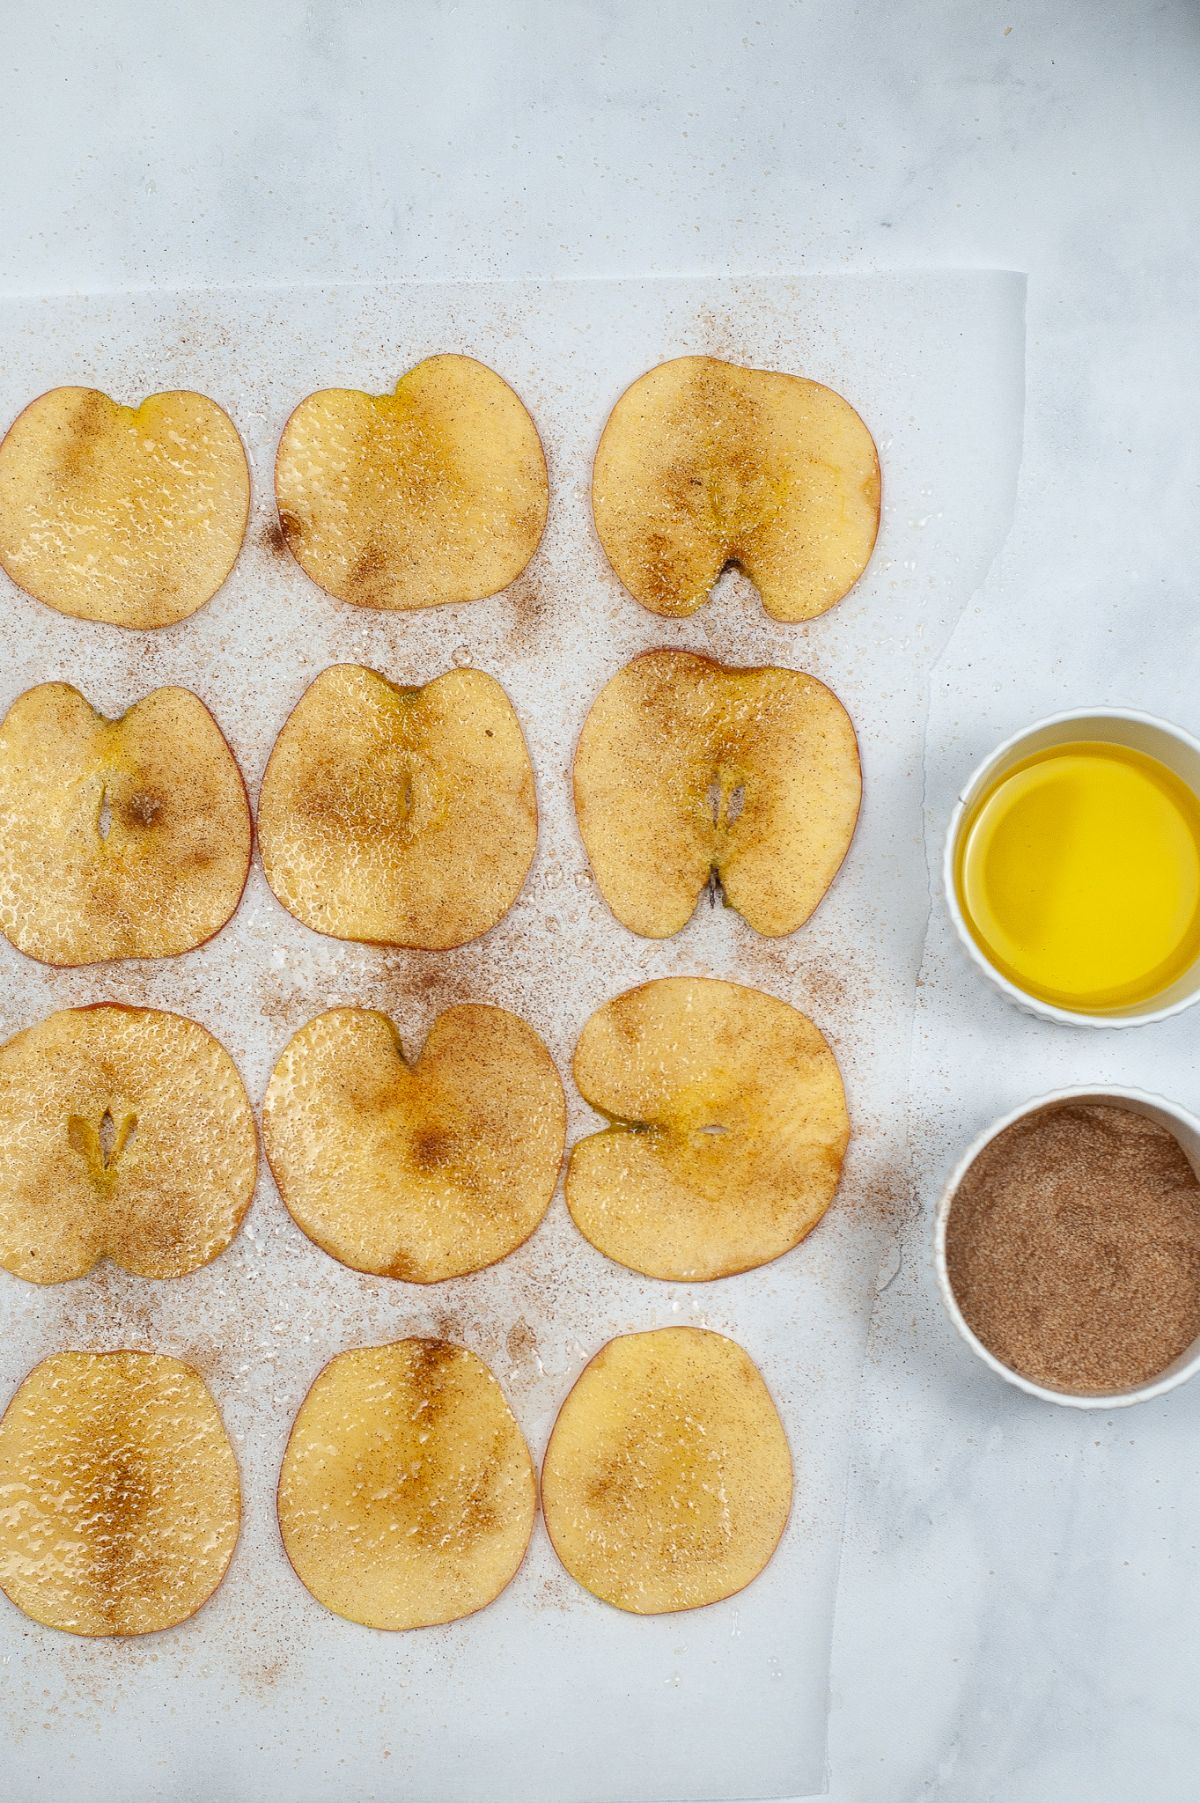 Thin slices of an apple on a parchment paper sprinkled with Cinnamon sugar.